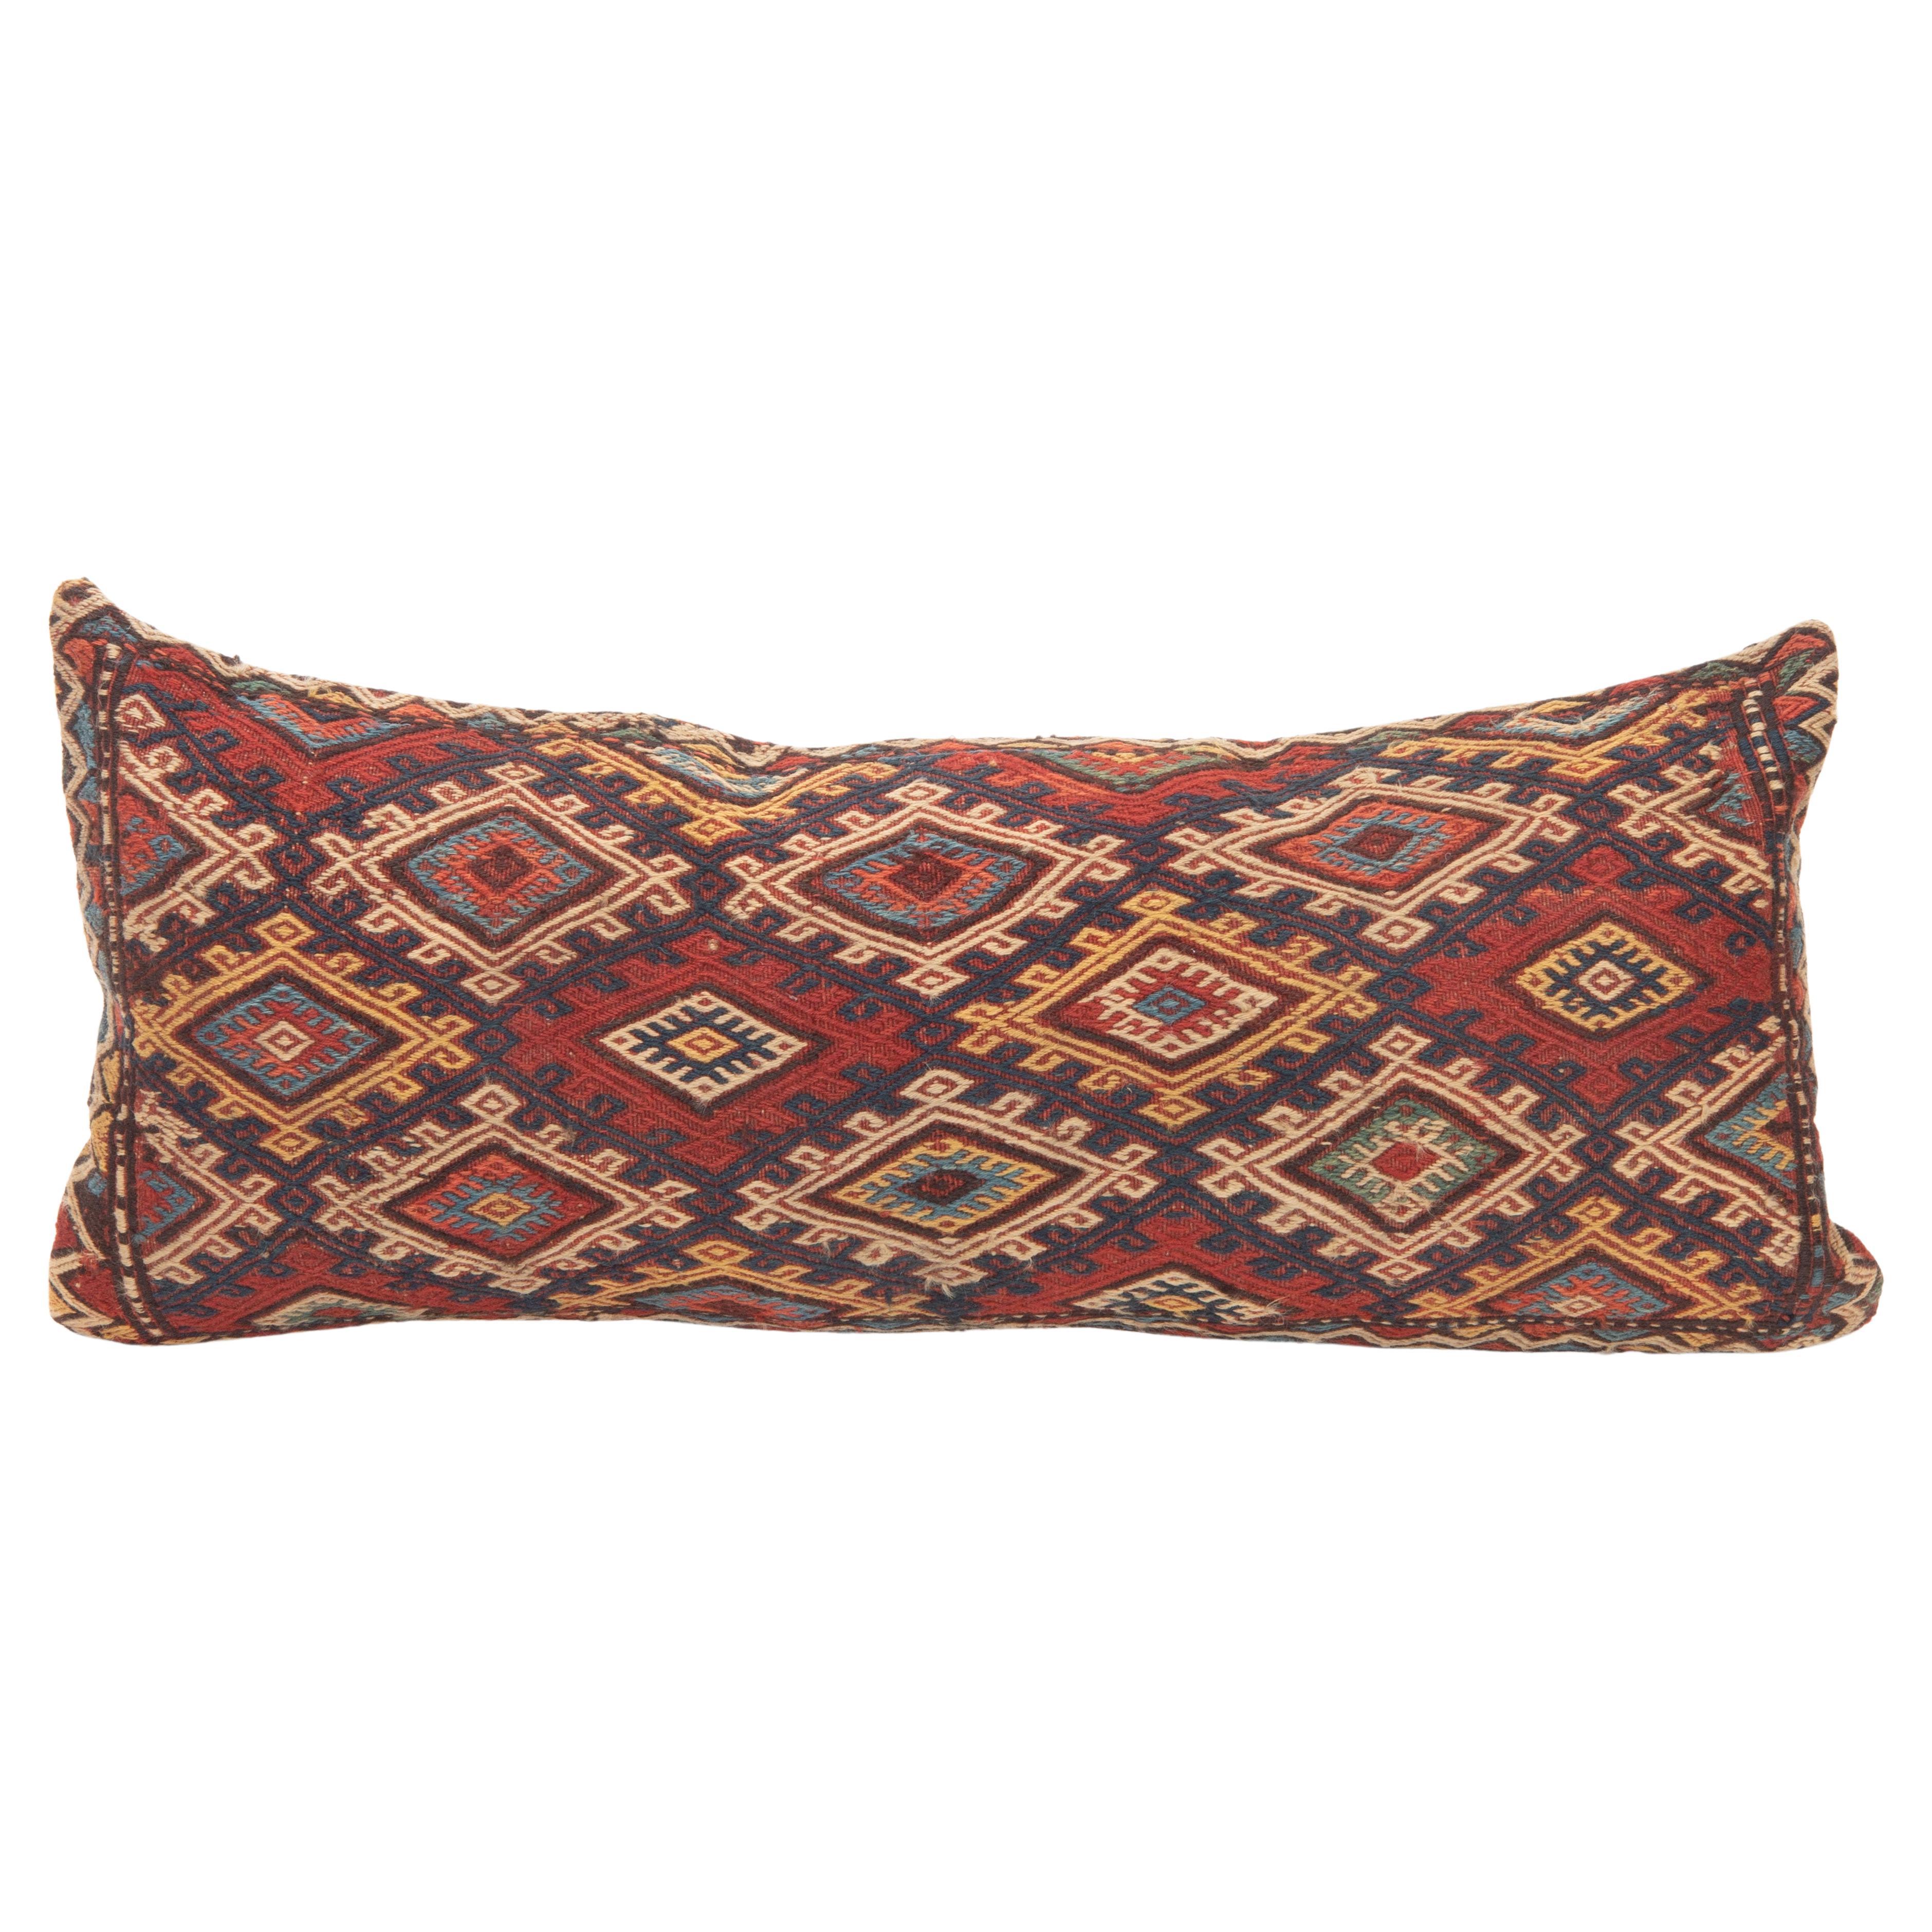 Pillow Cover Fashioned from an Antique Caucasian Mafrash ( storage Bag ) Panel For Sale